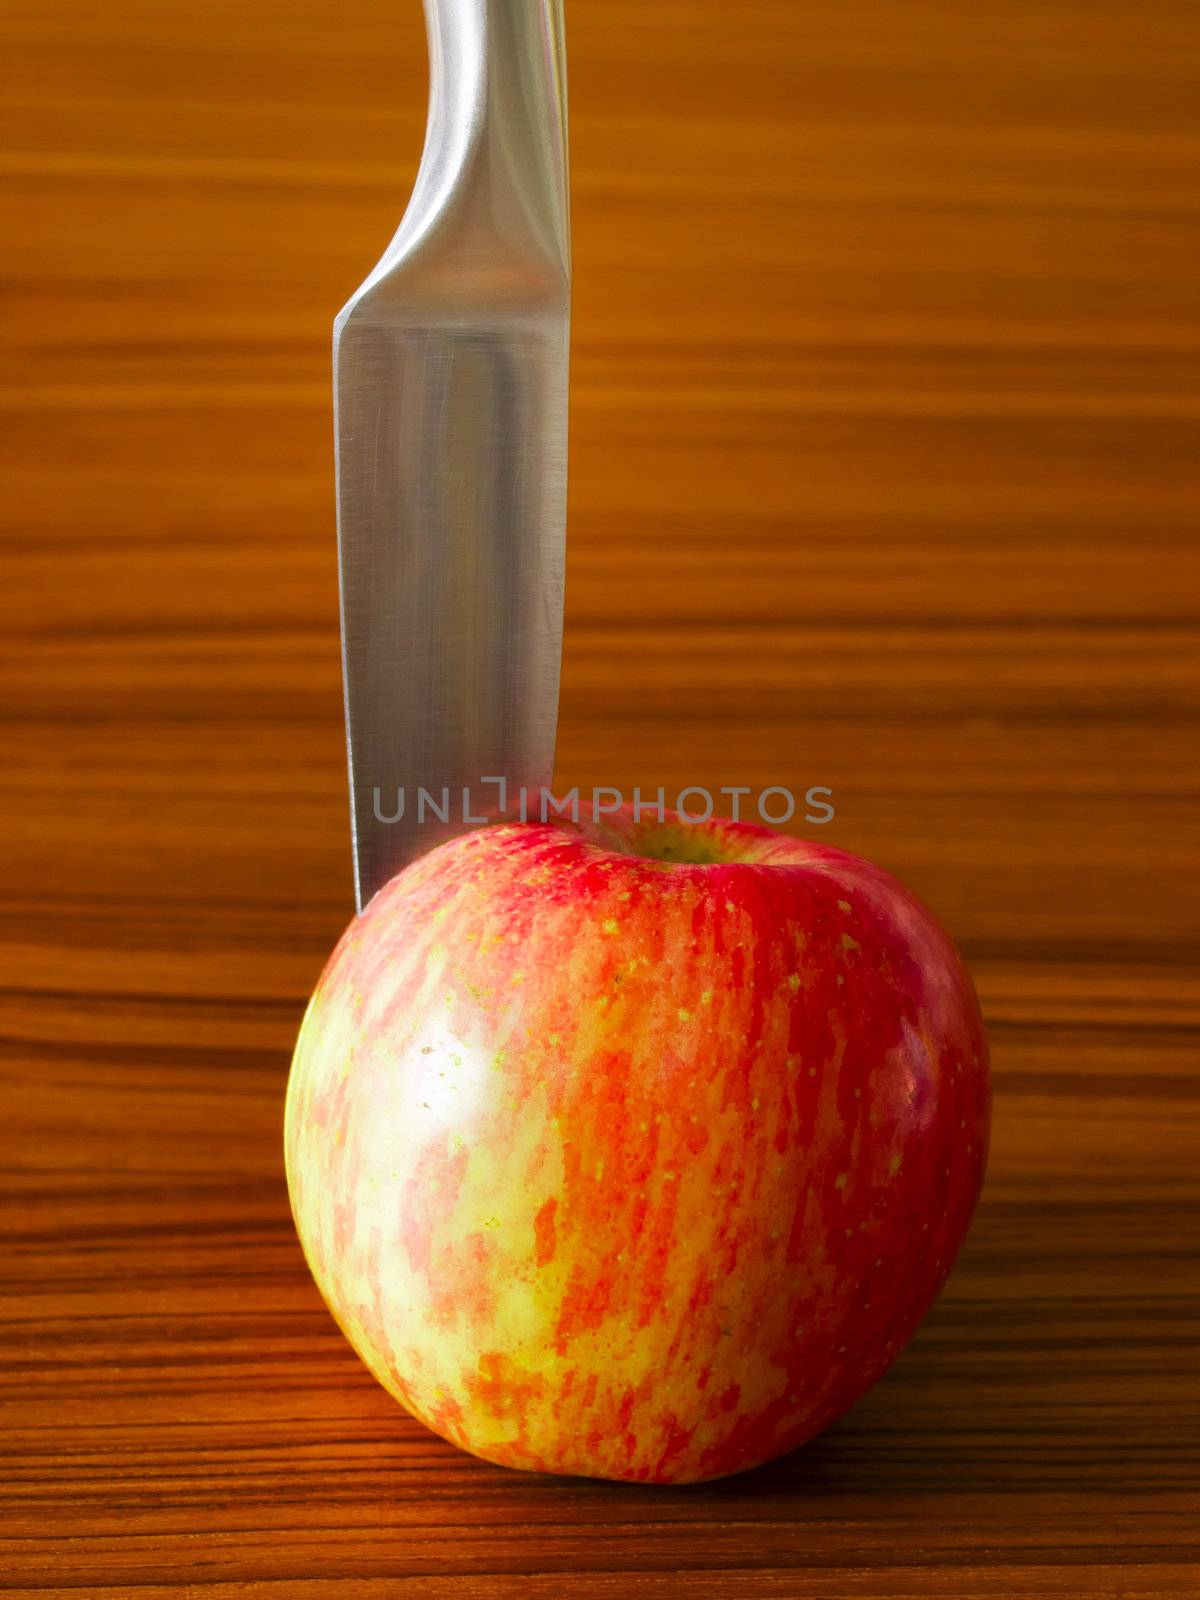 close up of red apple with knife